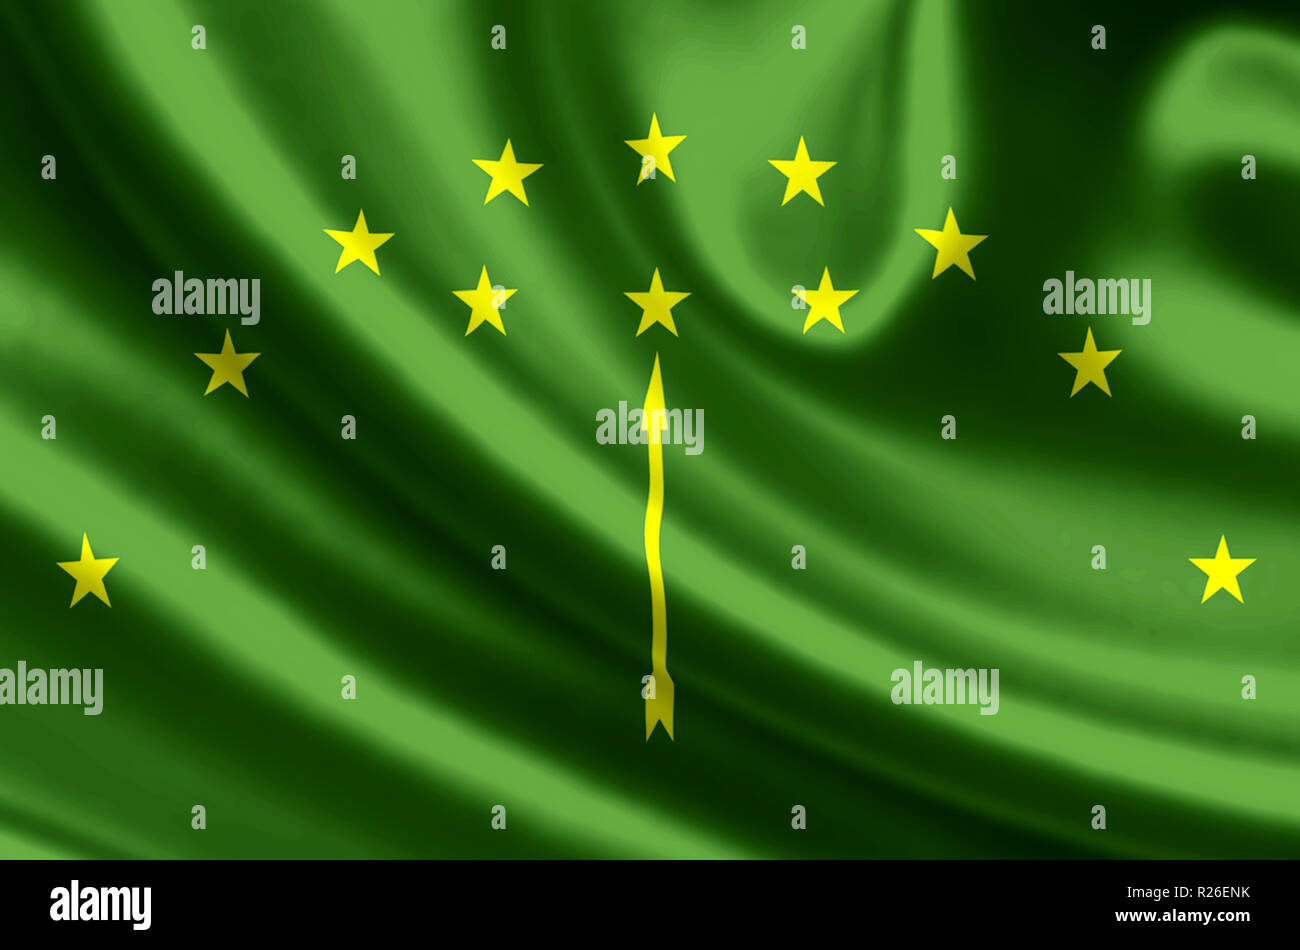 Adygea waving and closeup flag illustration. Perfect for background or texture purposes. Stock Photo